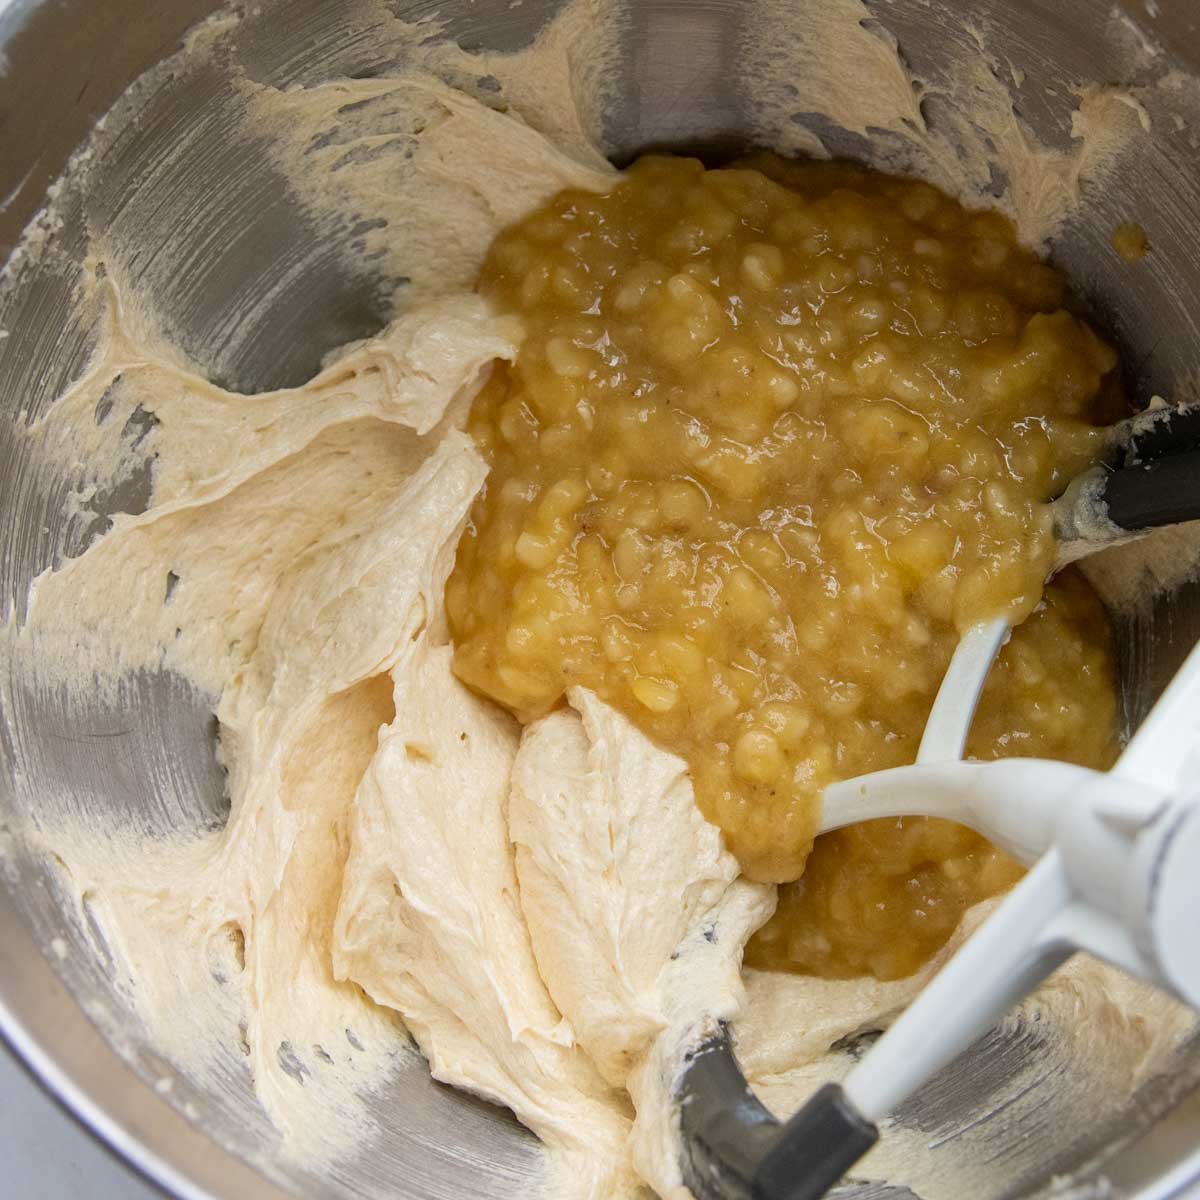 mashed banana added to the batter.